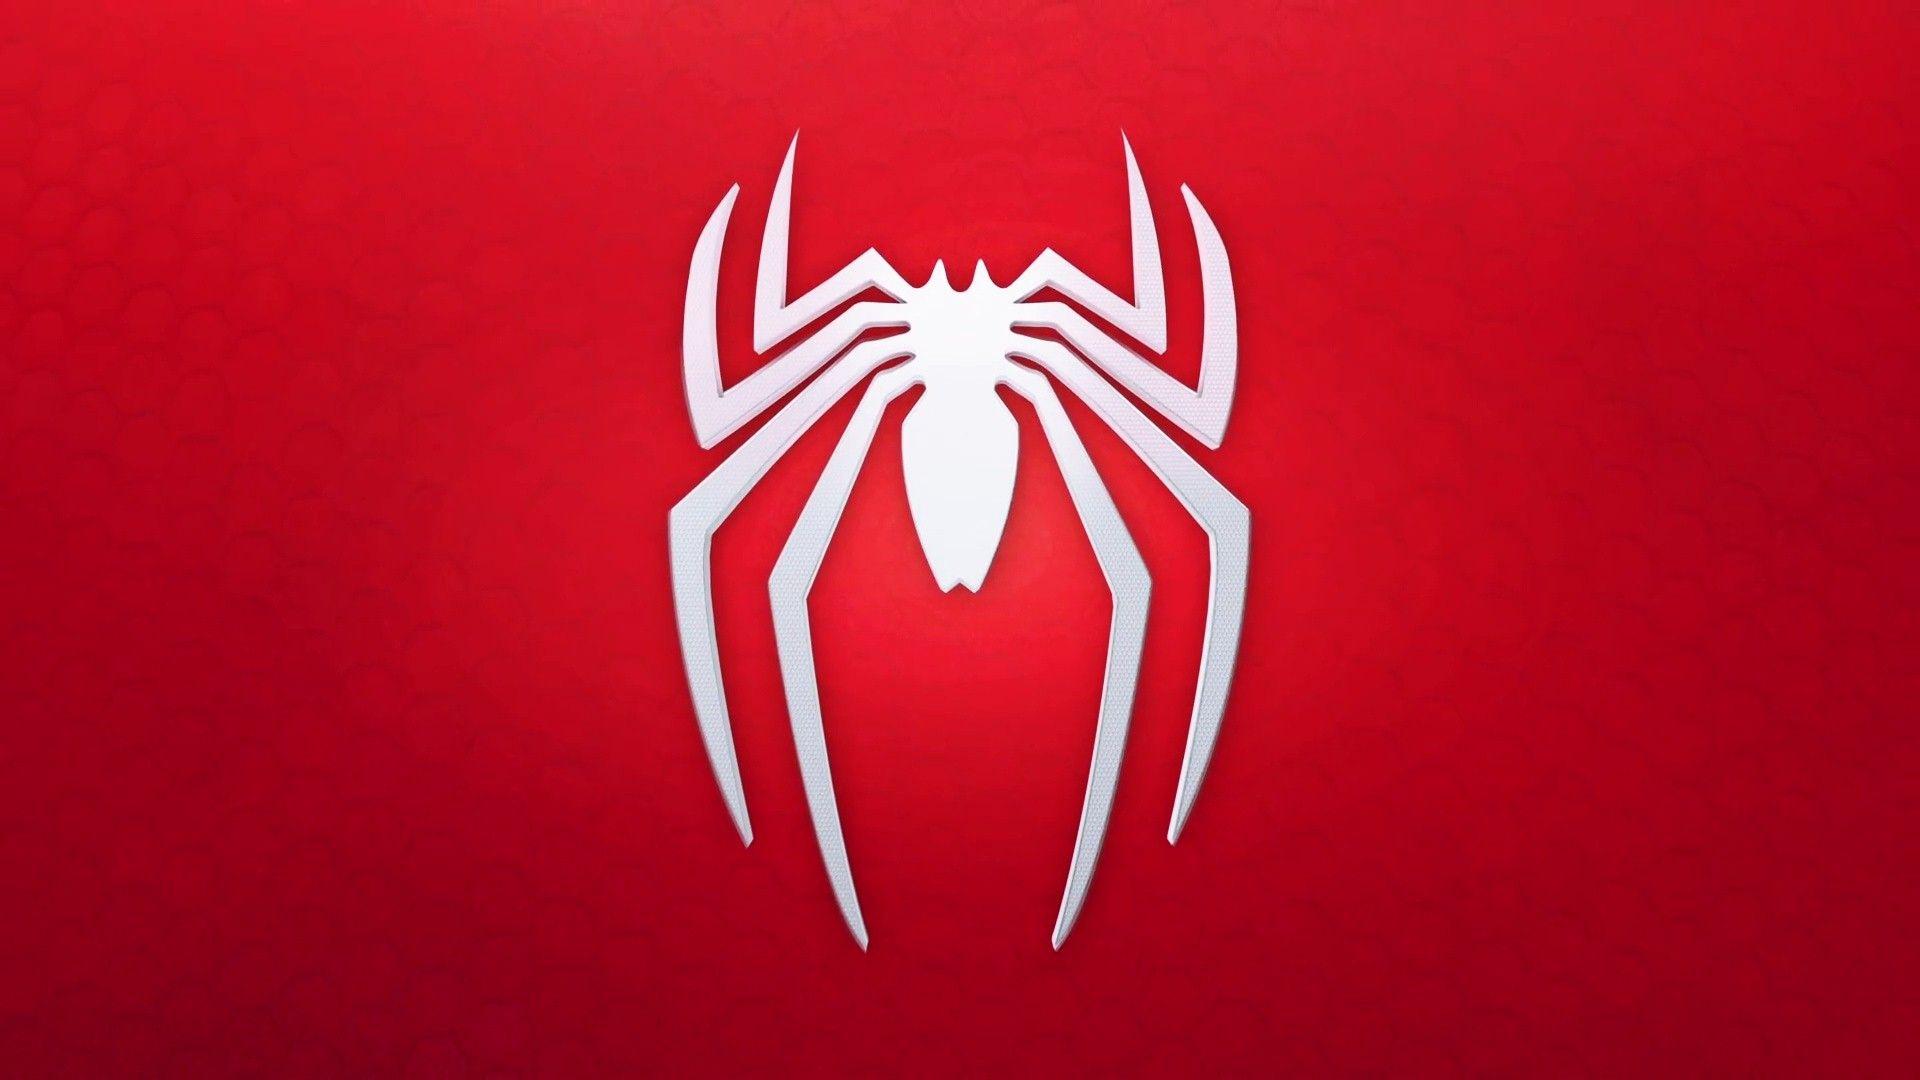 Cool Spider Logo - Spider Man PS4 Devs Have Cool Stuff Planned, Waiting For The Right